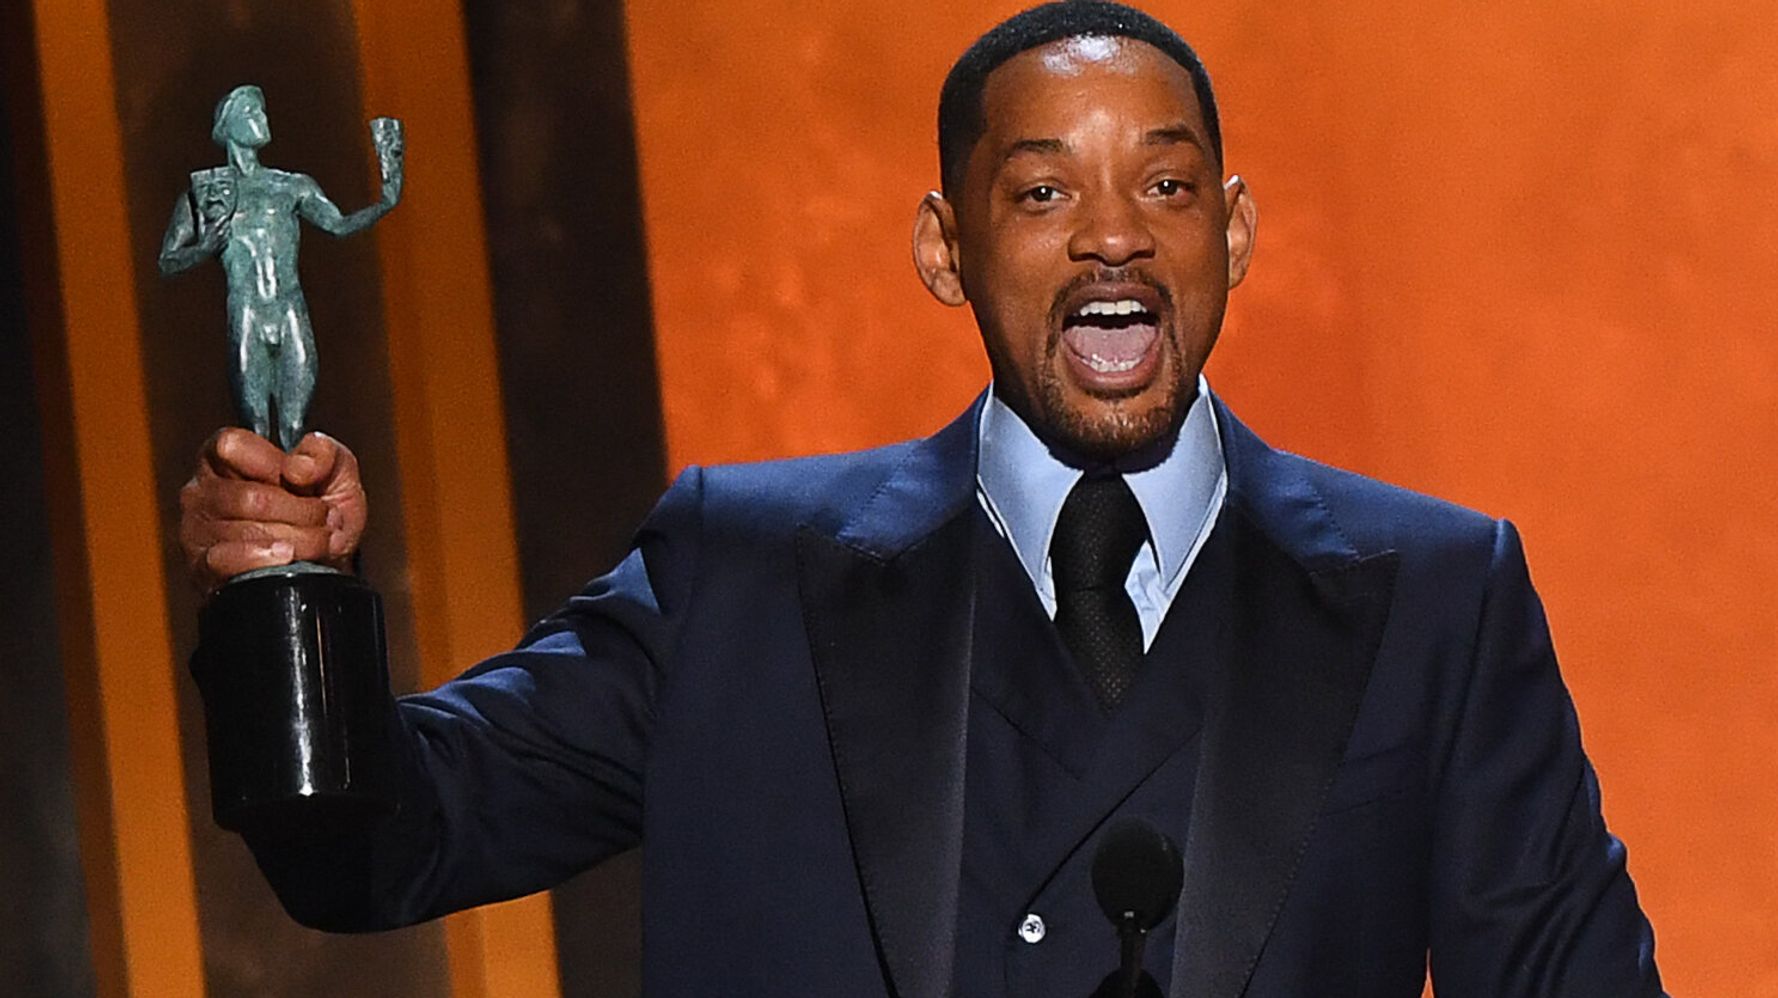 Will Smith Wins SAG Award For 'King Richard': 'One Of The Greatest Moments Of My Career'